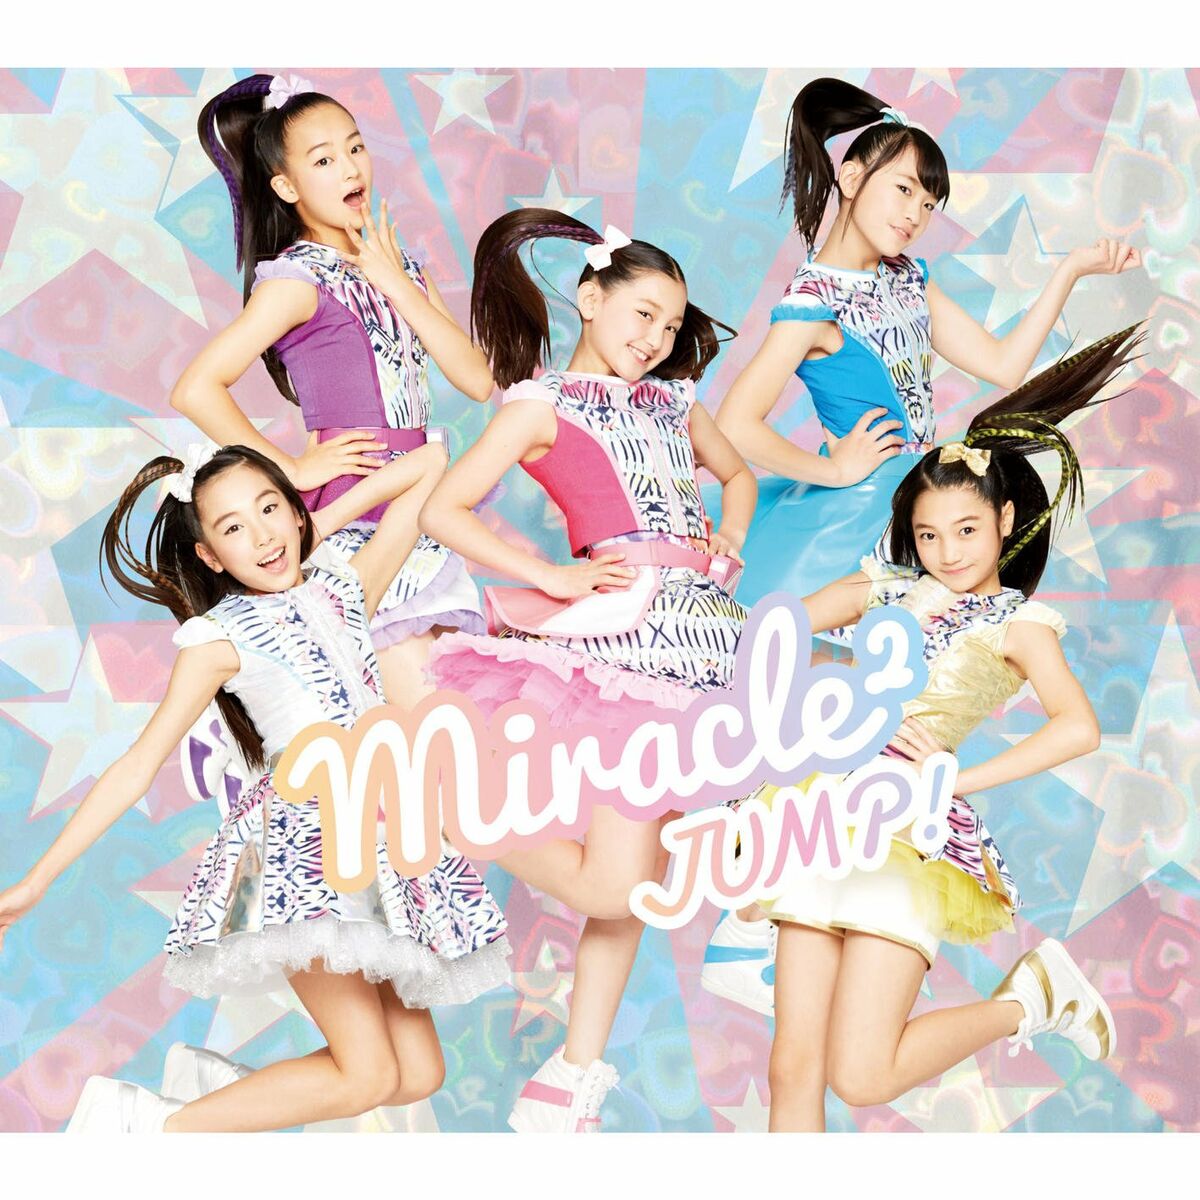 miracle2 from Miracle Tunes: albums, songs, playlists | Listen on 